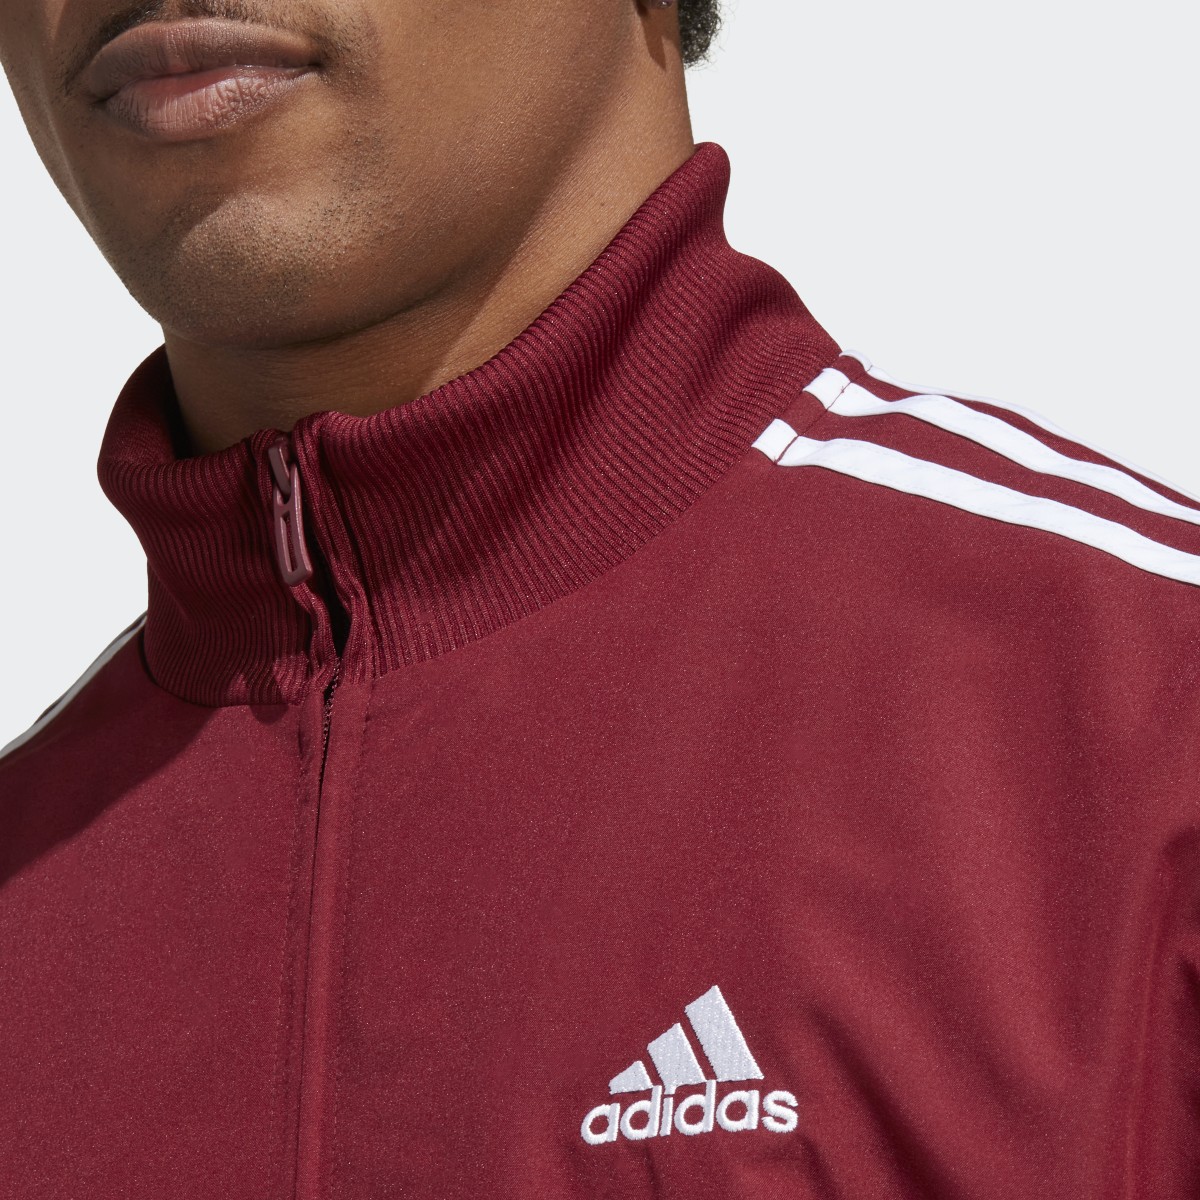 Adidas 3-Stripes Woven Track Suit. 8